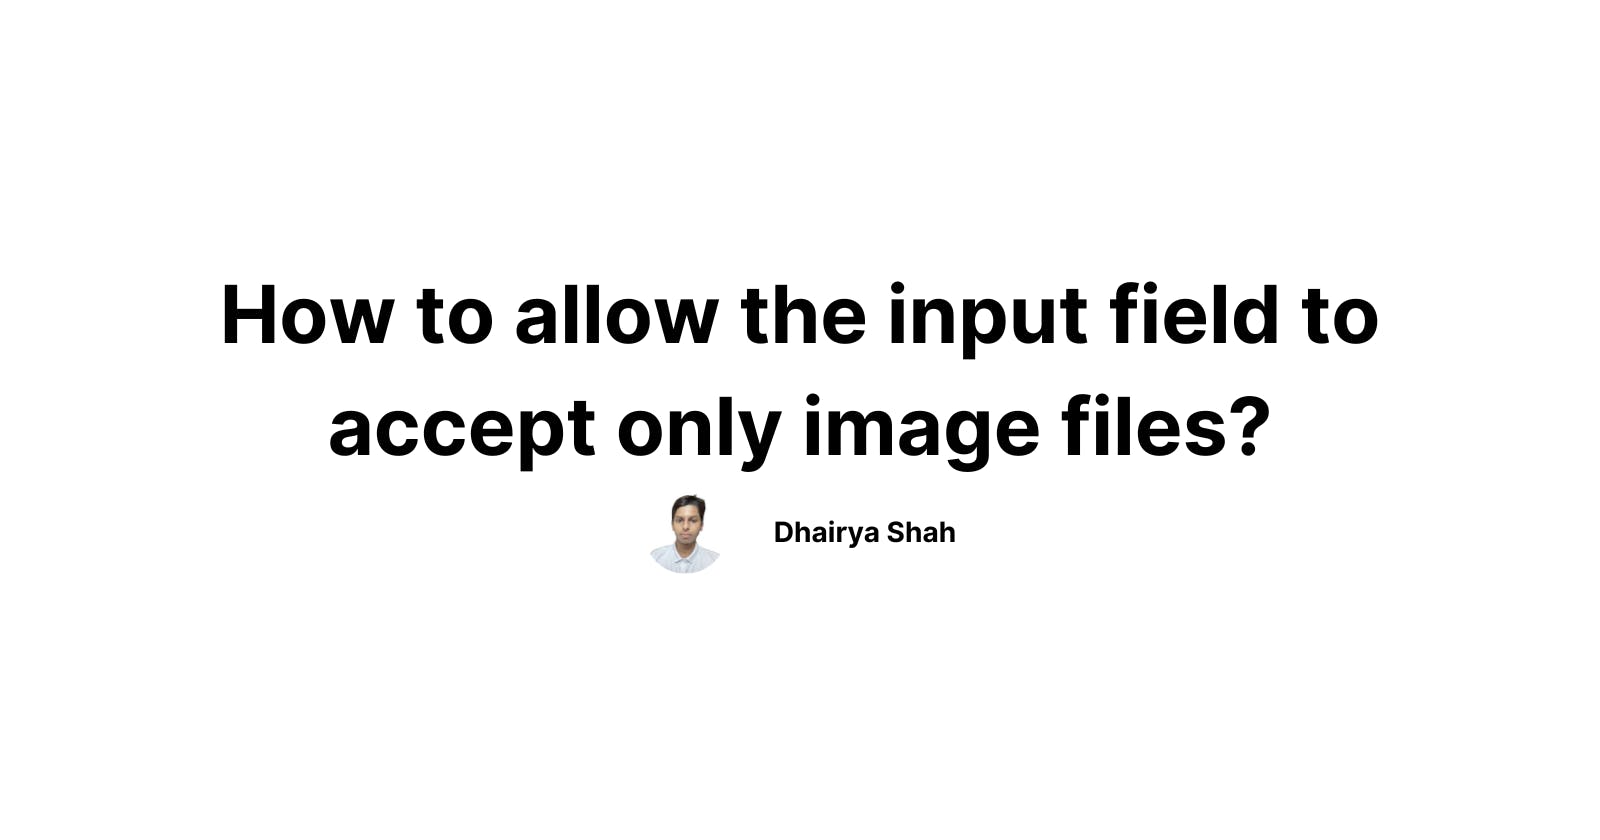 How to allow the input field to accept only image files?